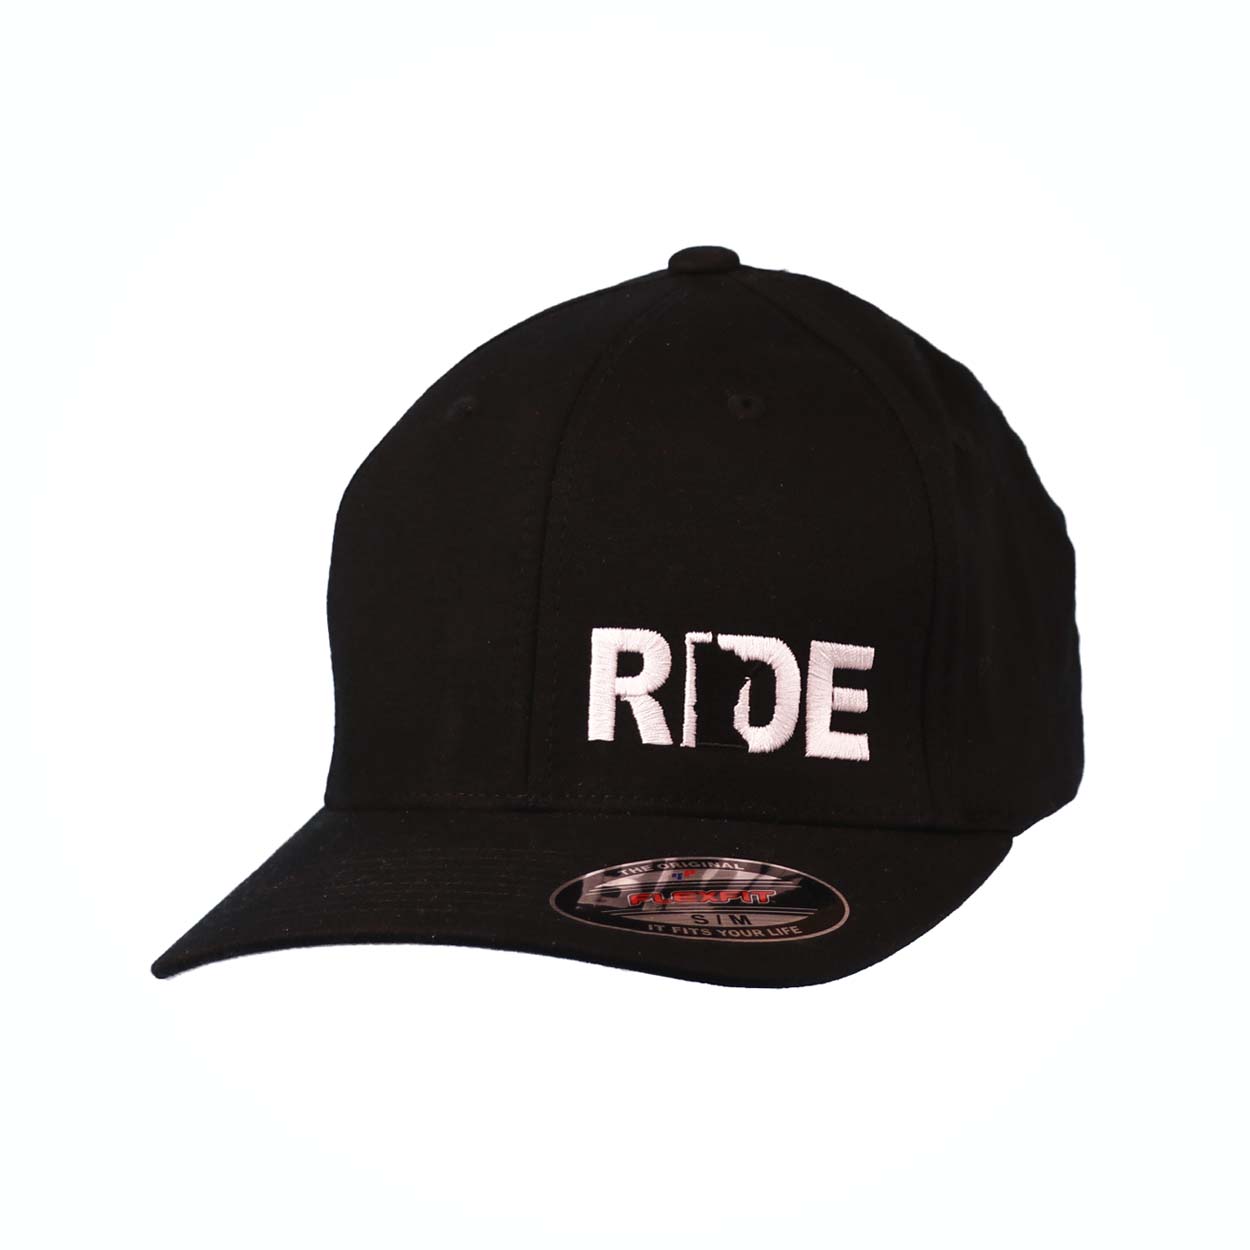 Ride Minnesota Night Out Pro Embroidered Flex Fit Trucker Hat Black